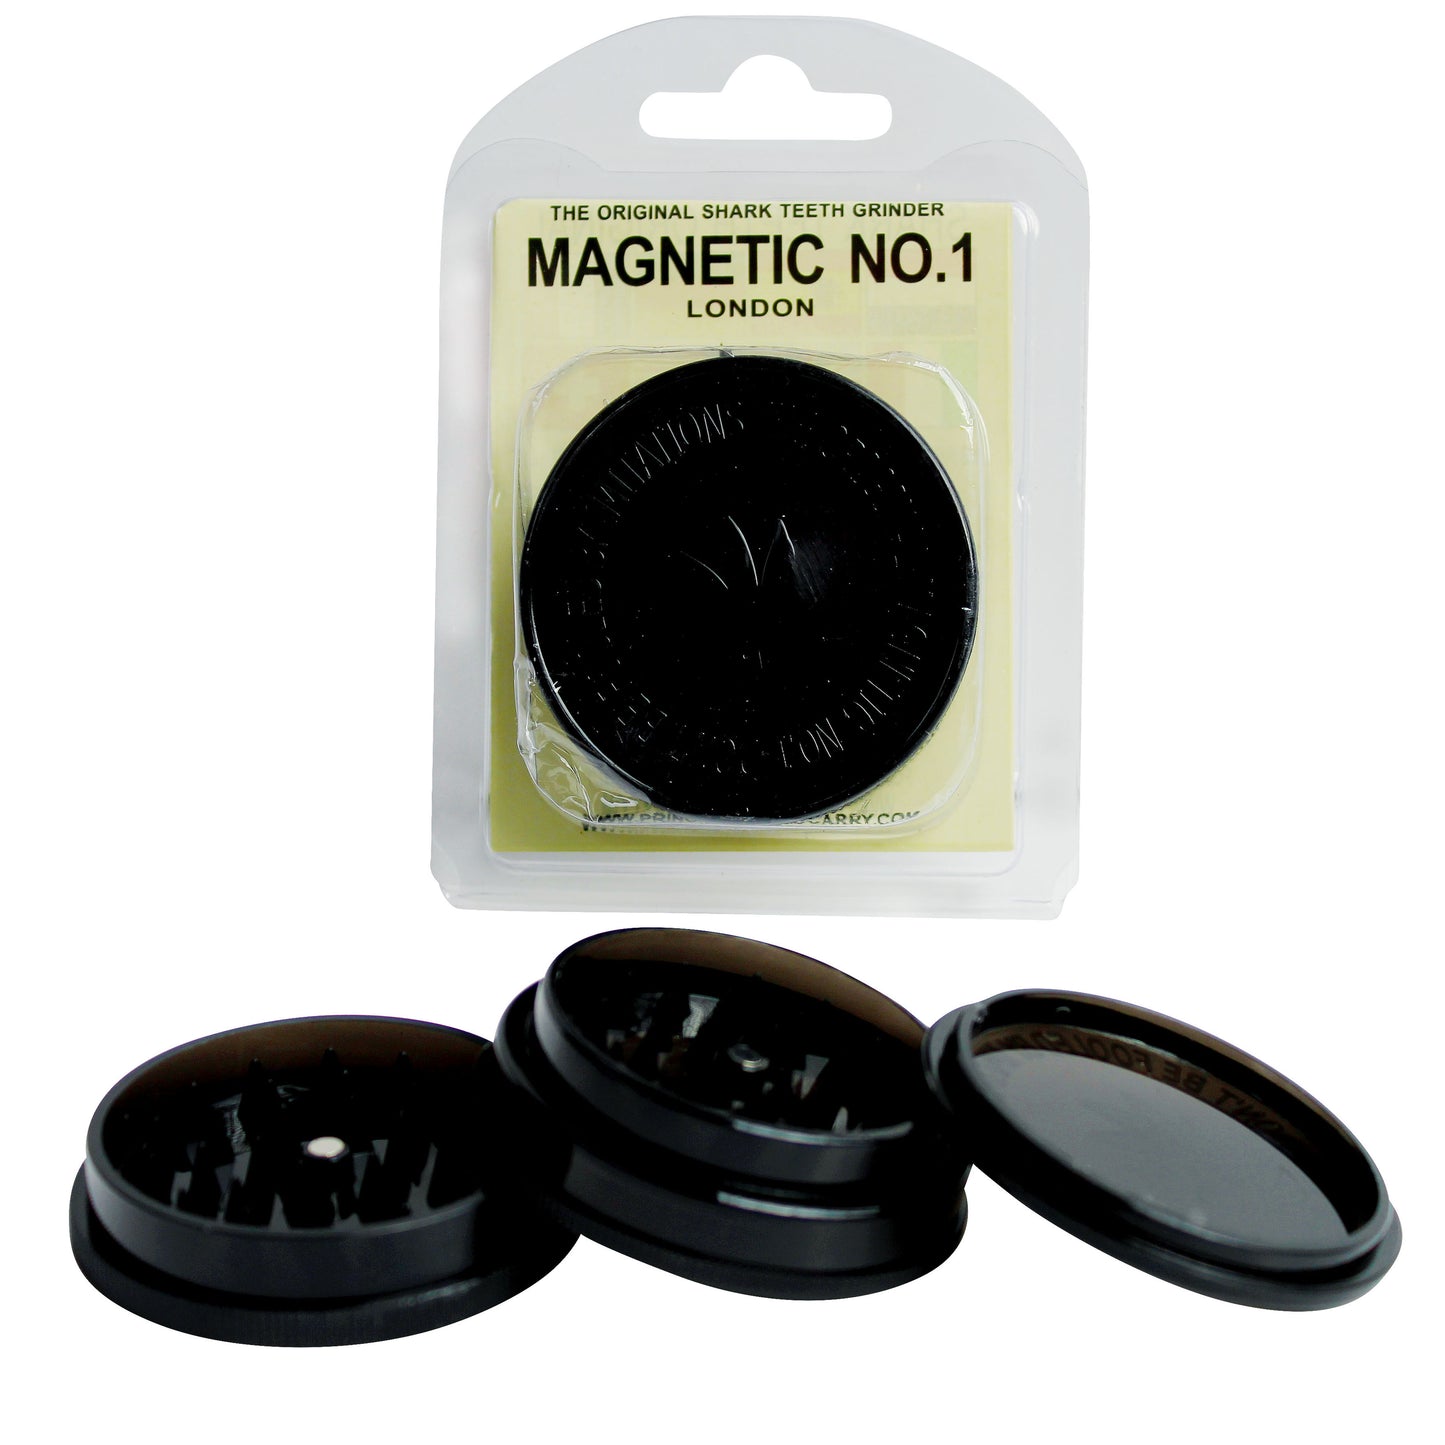 No 1 Magnetic